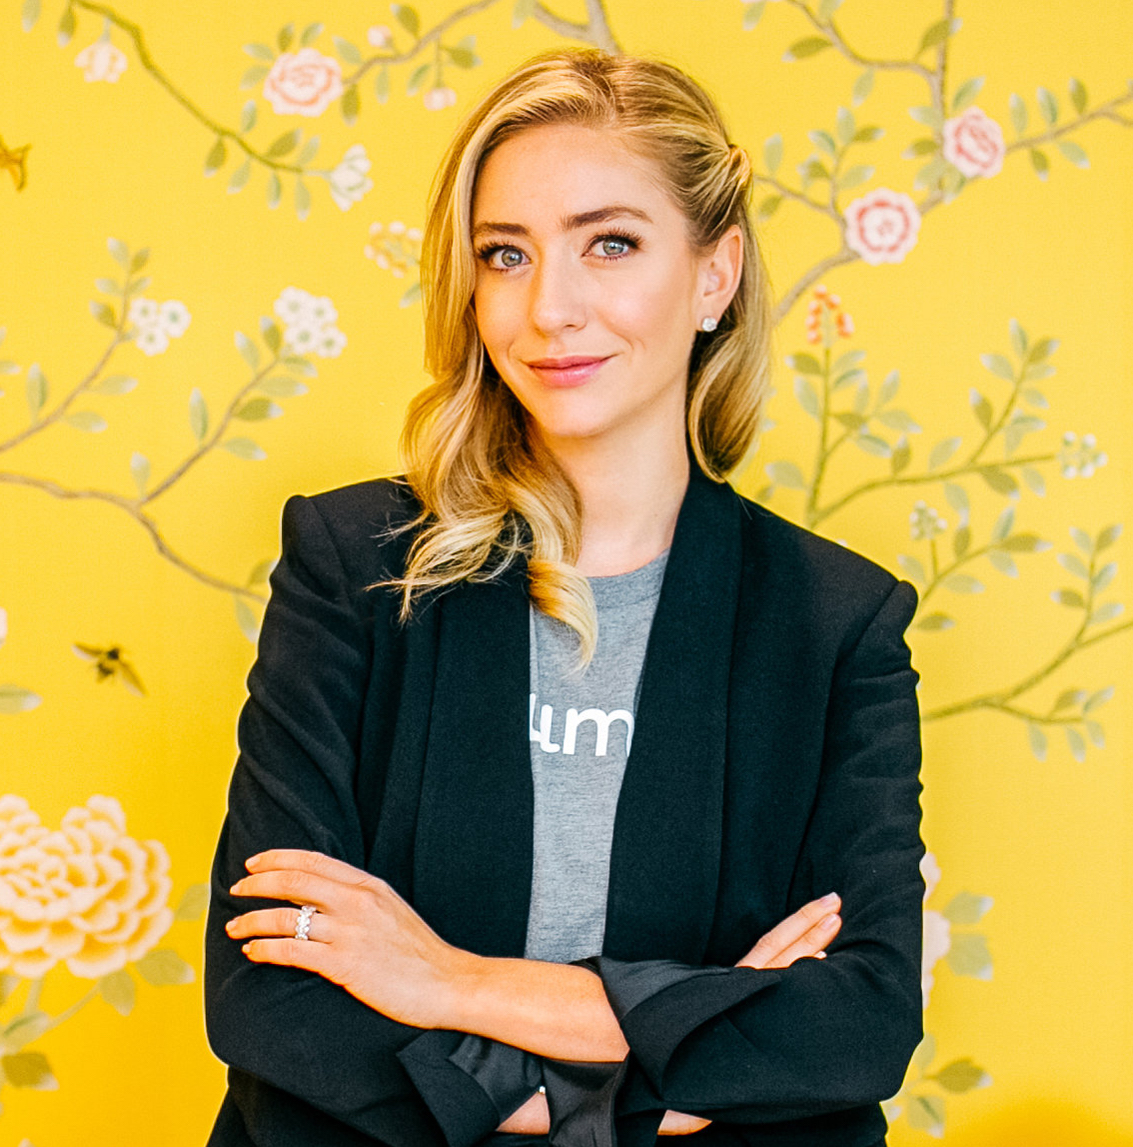 The Woman Behind Bumble